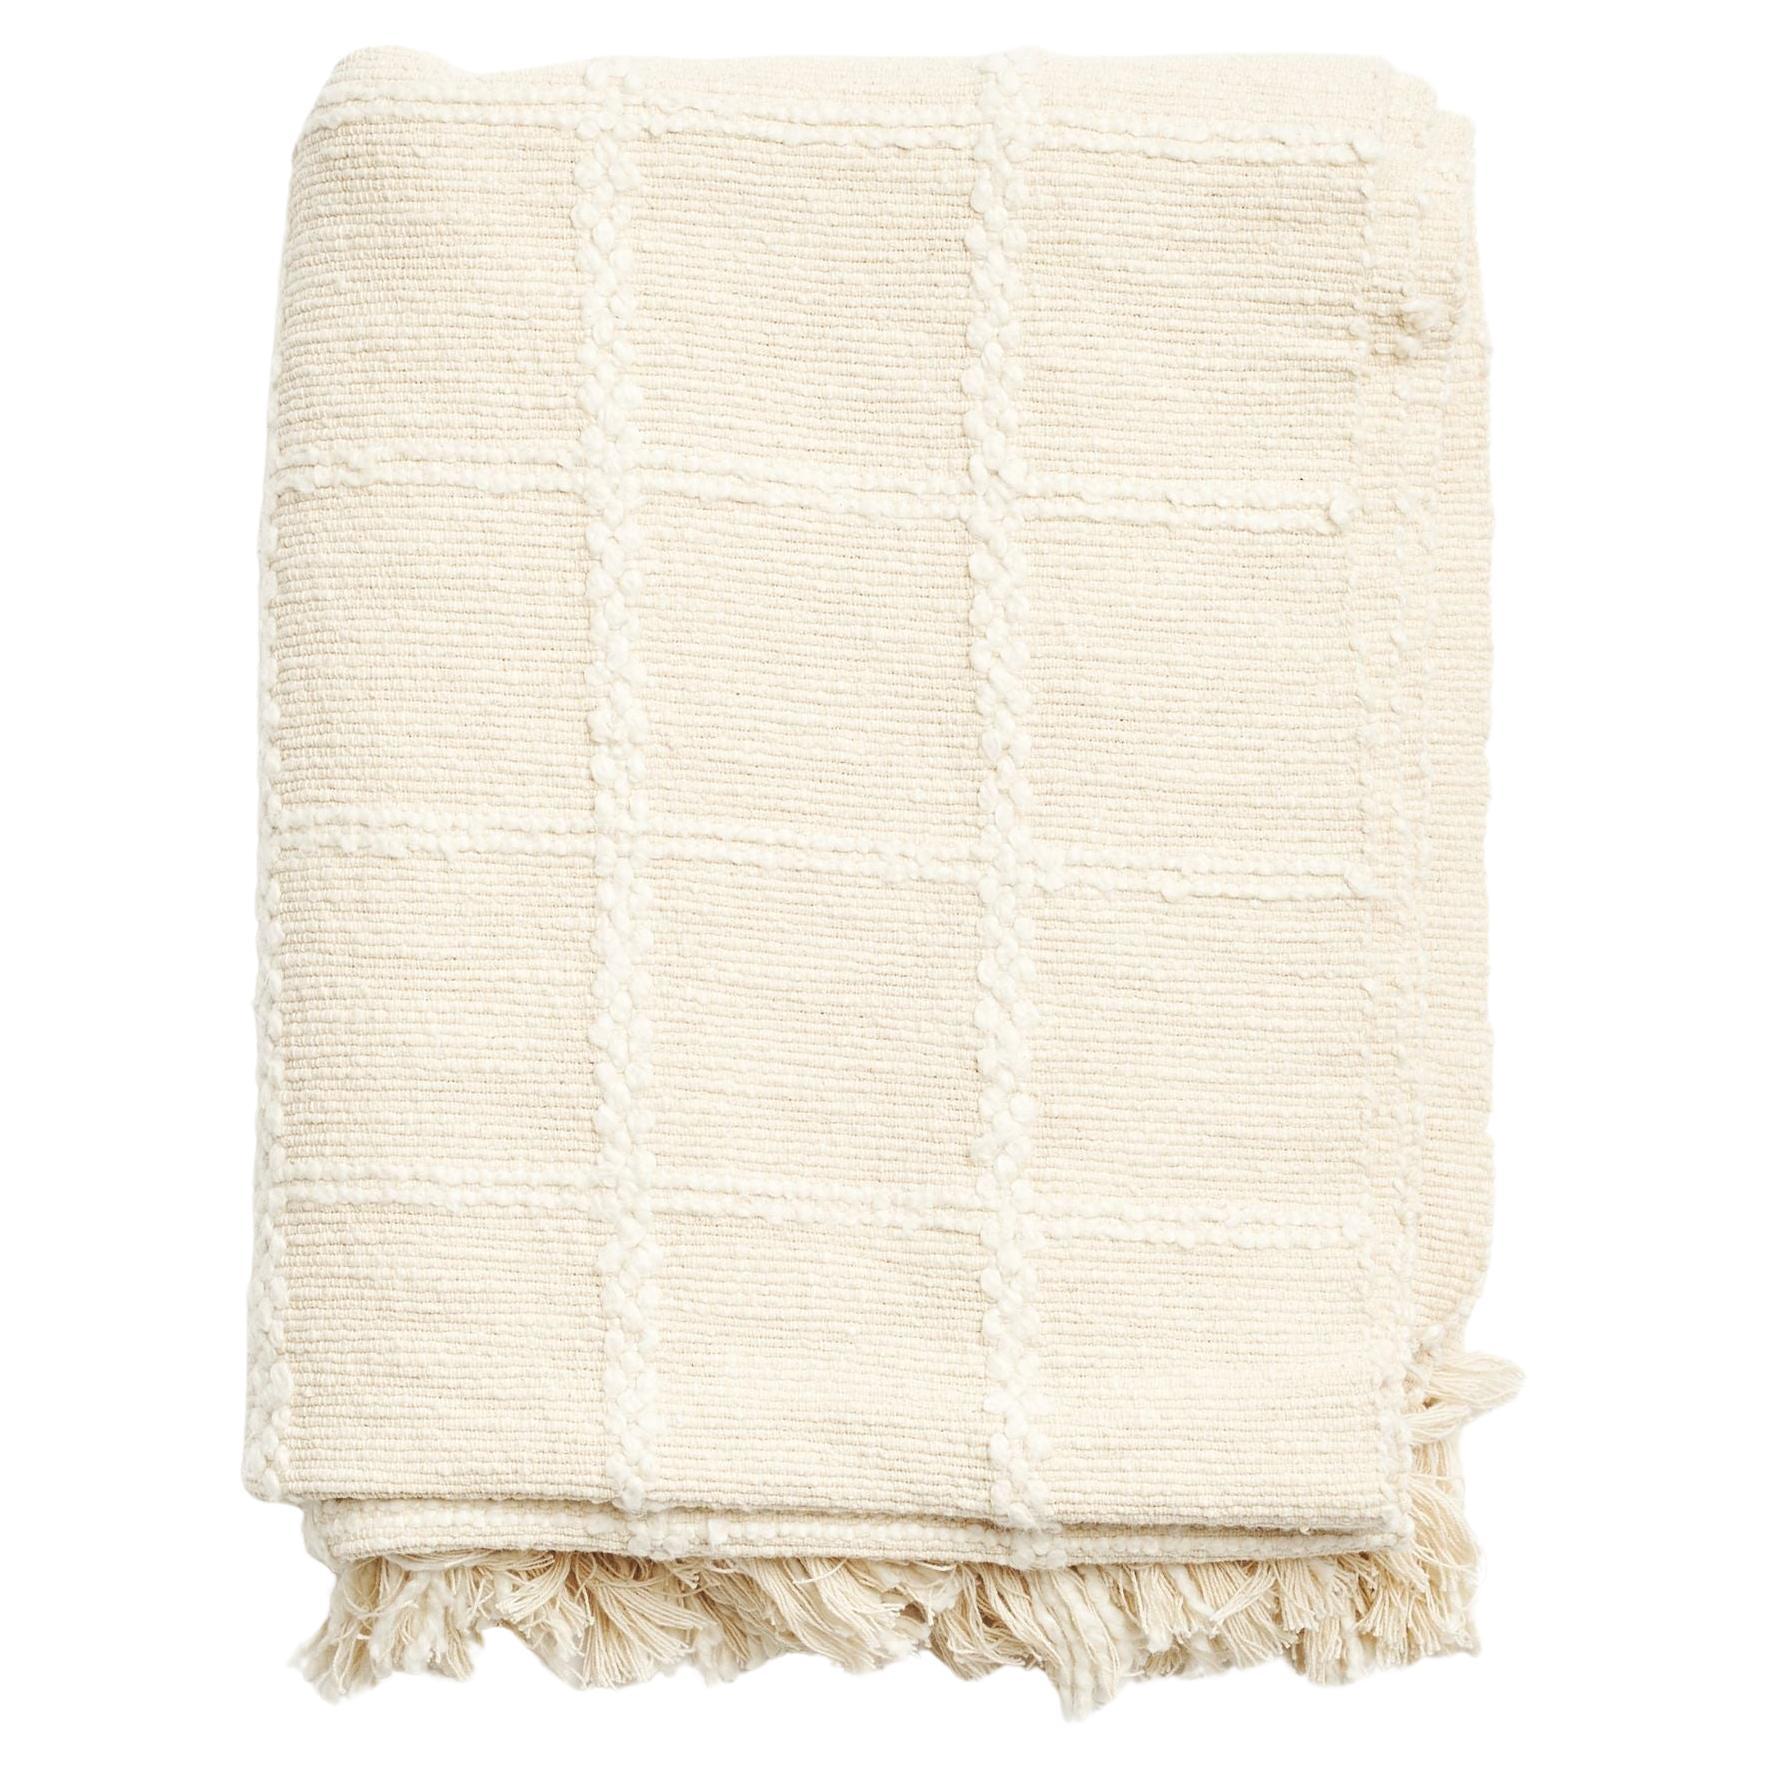 Sea Shell White Textured Weave Pure Cotton Handloom Throw For Sale